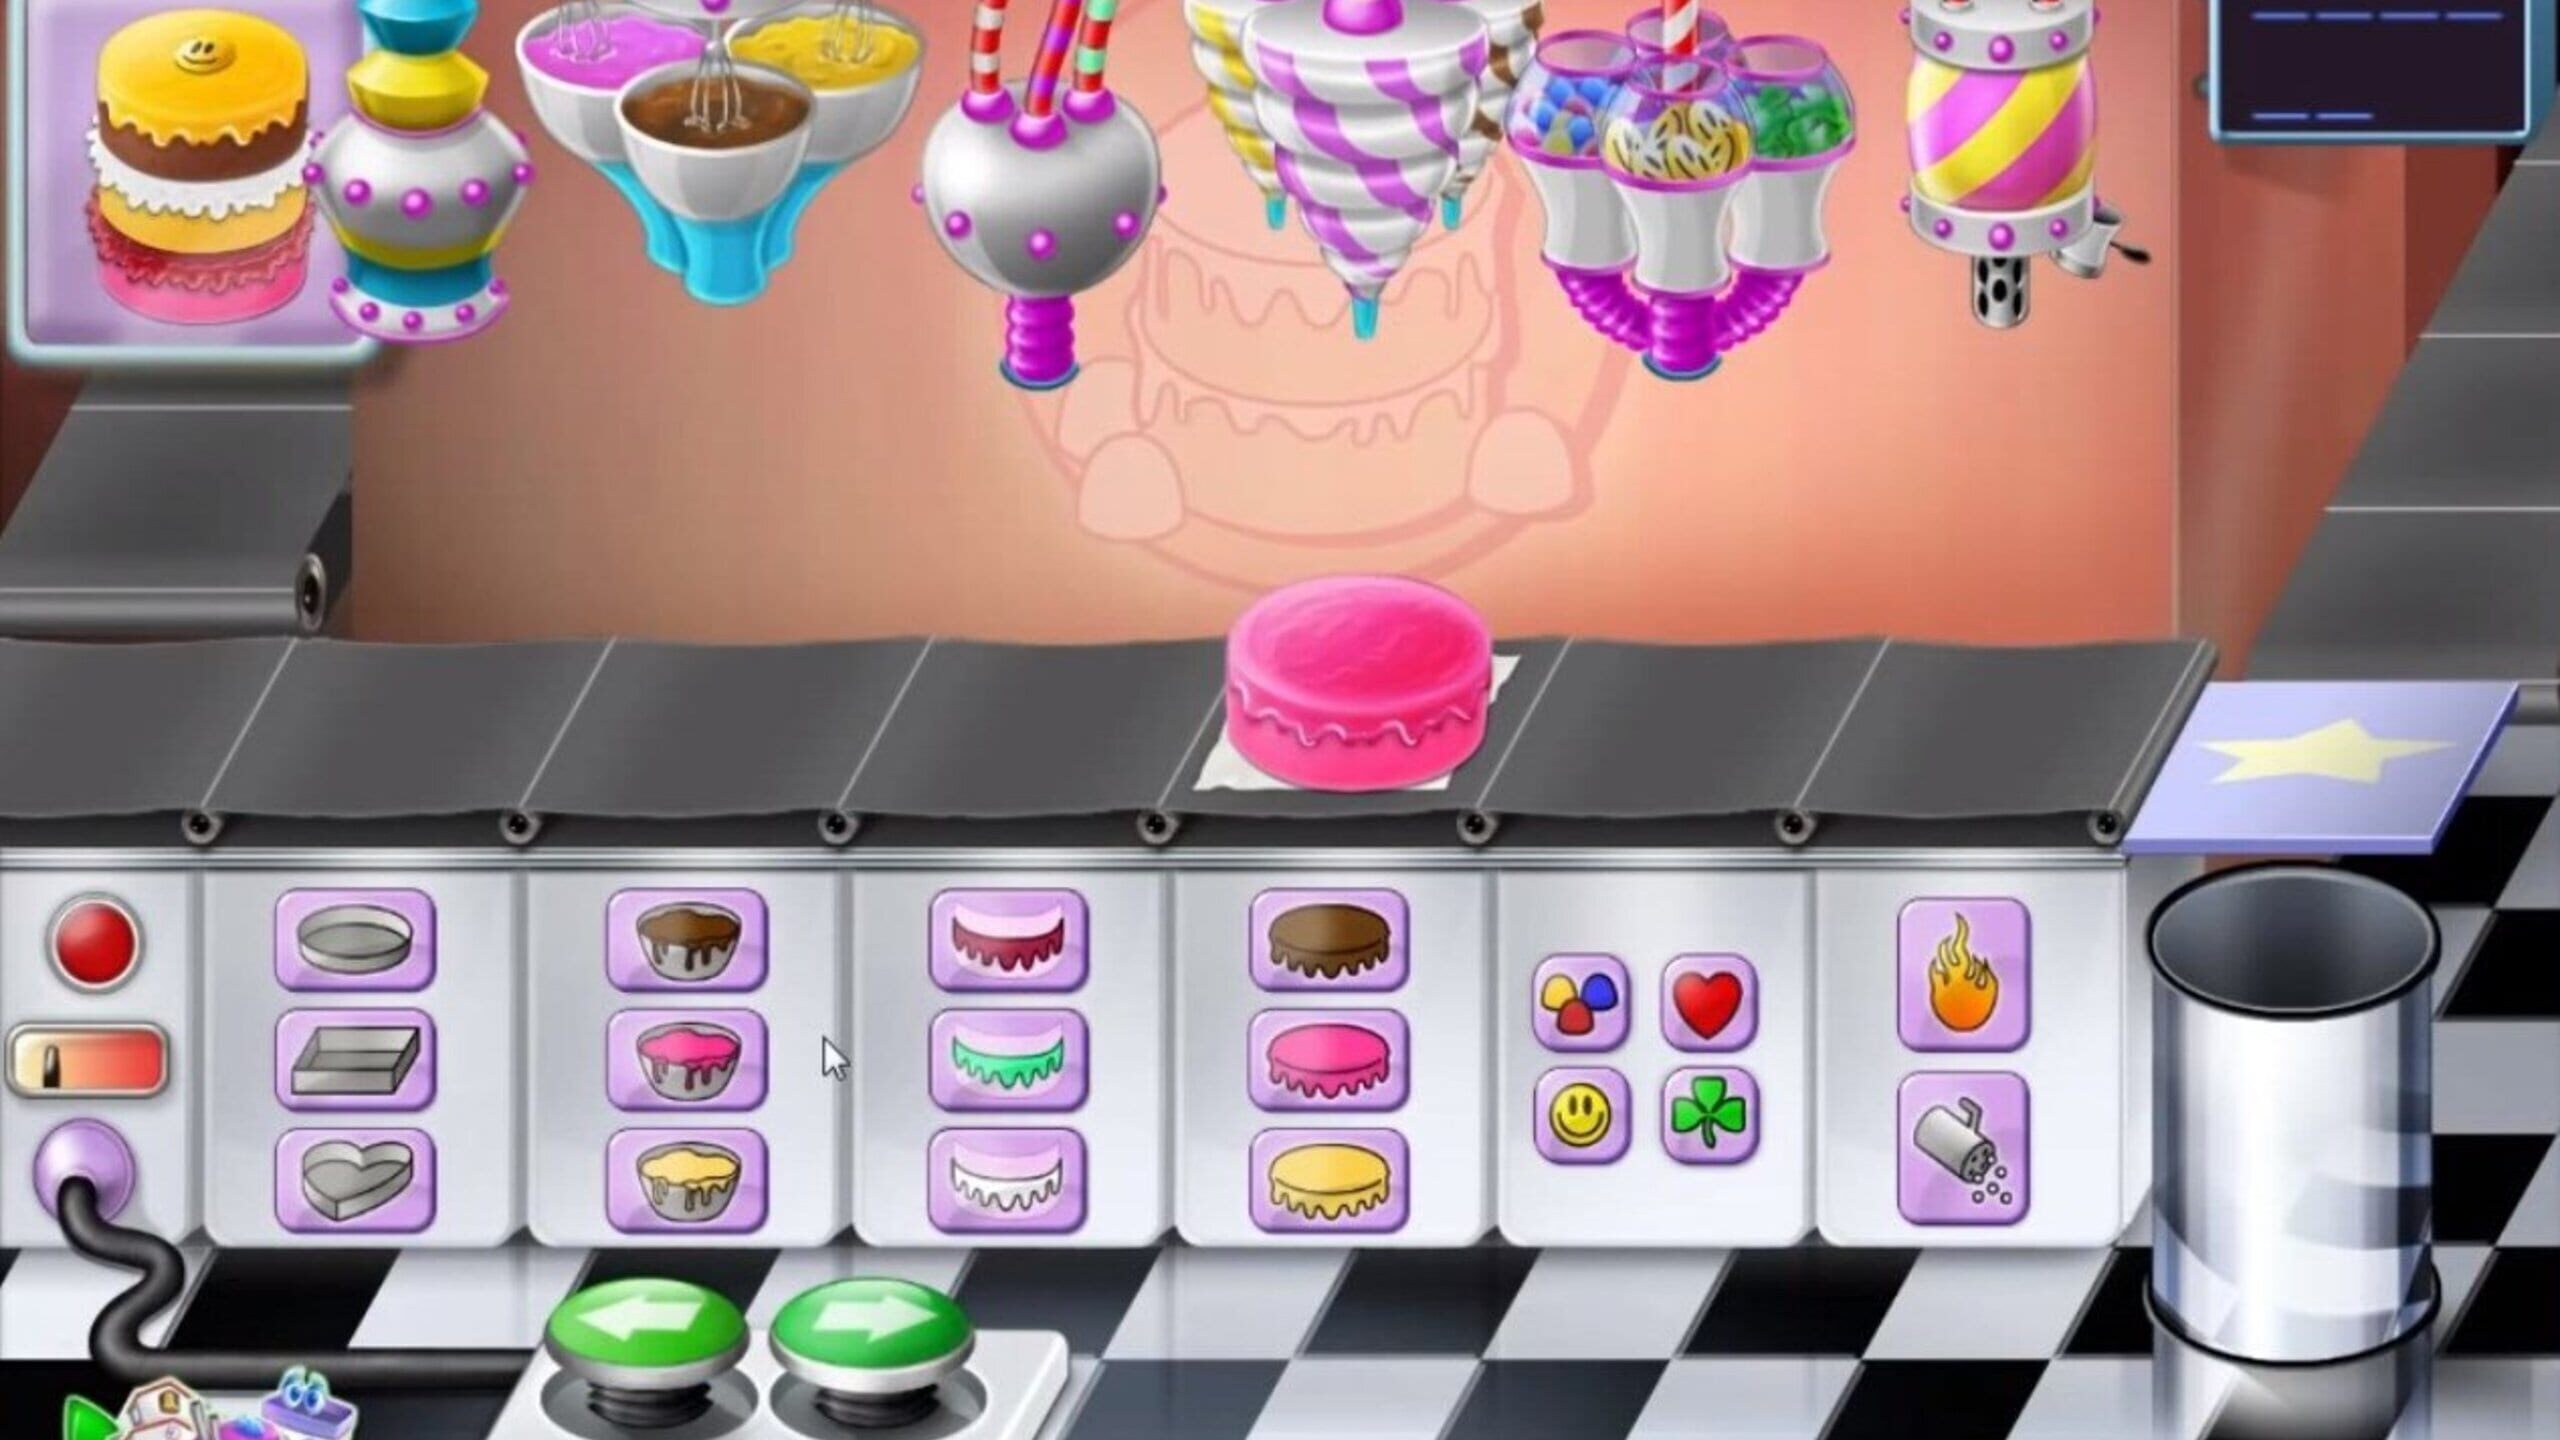 Fun Learn 3D Cake Cooking Game |  https://www.youtube.com/watch?v=PnU4NnDZ2W8 Fun Learn 3D Cake Cooking &  Colors My Bakery Empire Bake Decorate & Serve Cakes Games For Kids Hungry?  Get... | By Thùy Dương